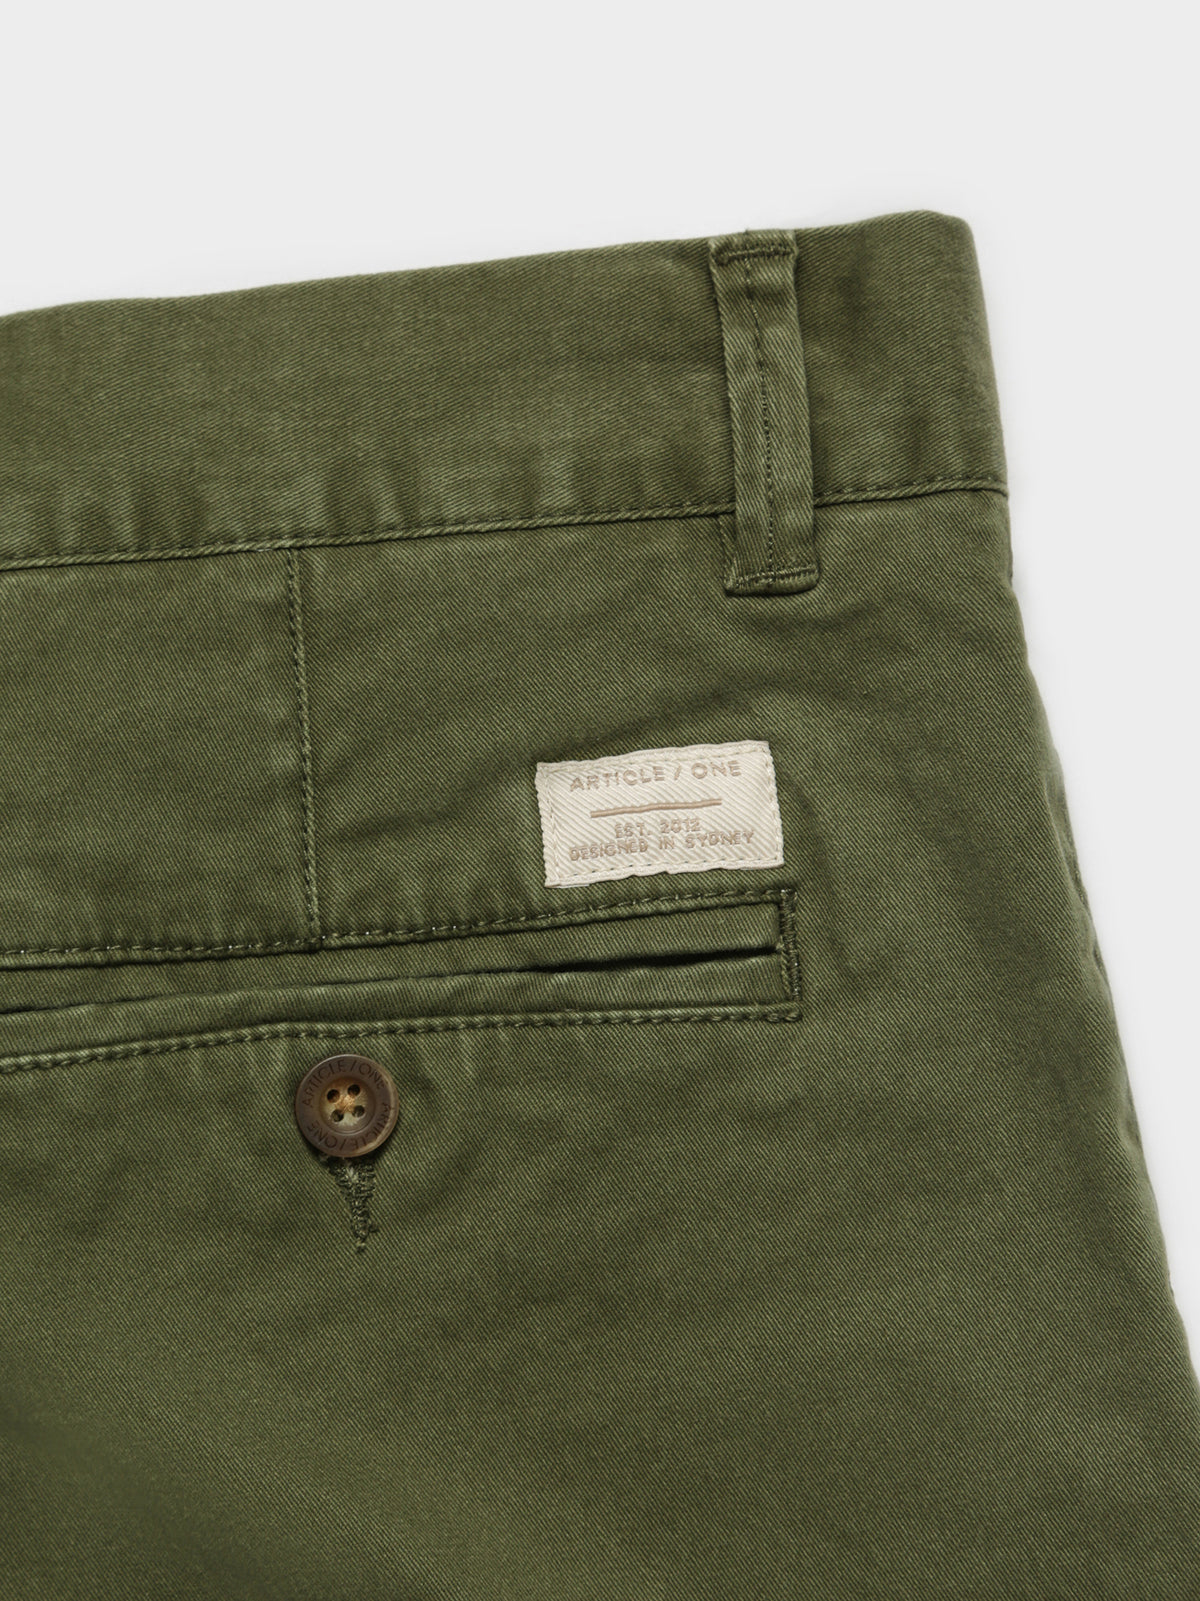 Hunter Chino Shorts in Olive